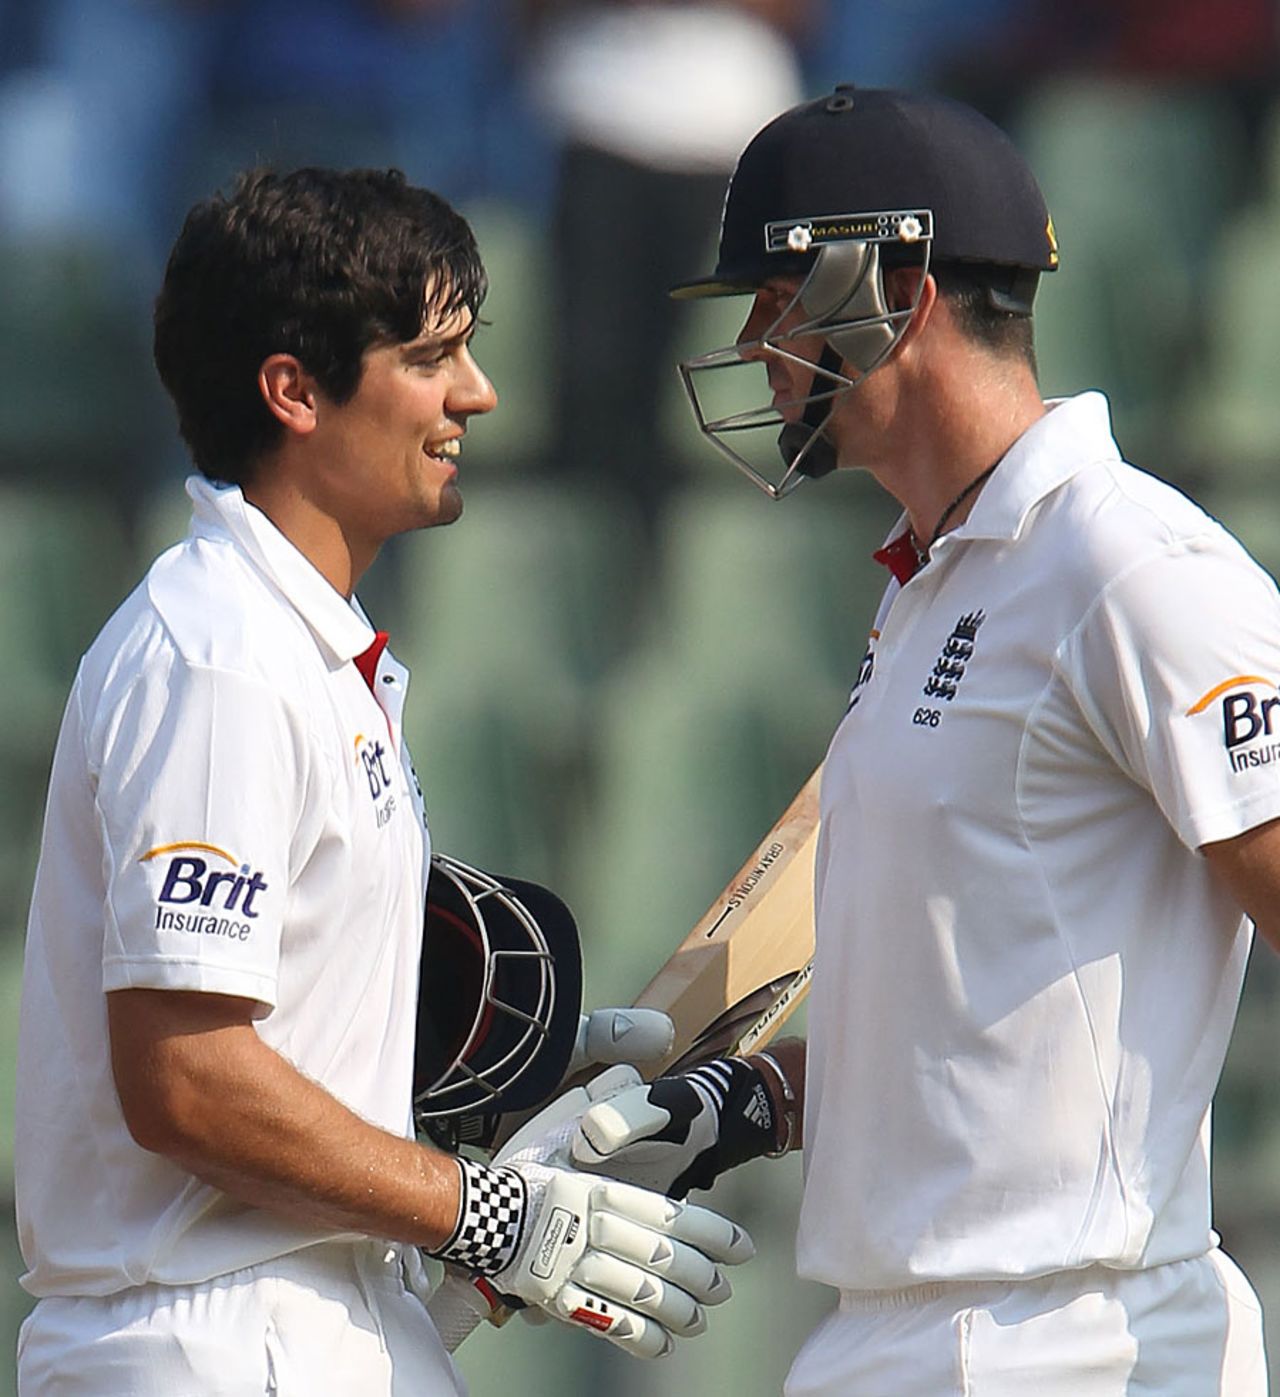 Alastair Cook gets a handshake from Kevin Pietersen after reaching his century, India v England, 2nd Test, Mumbai, 2nd day, November 25, 2012